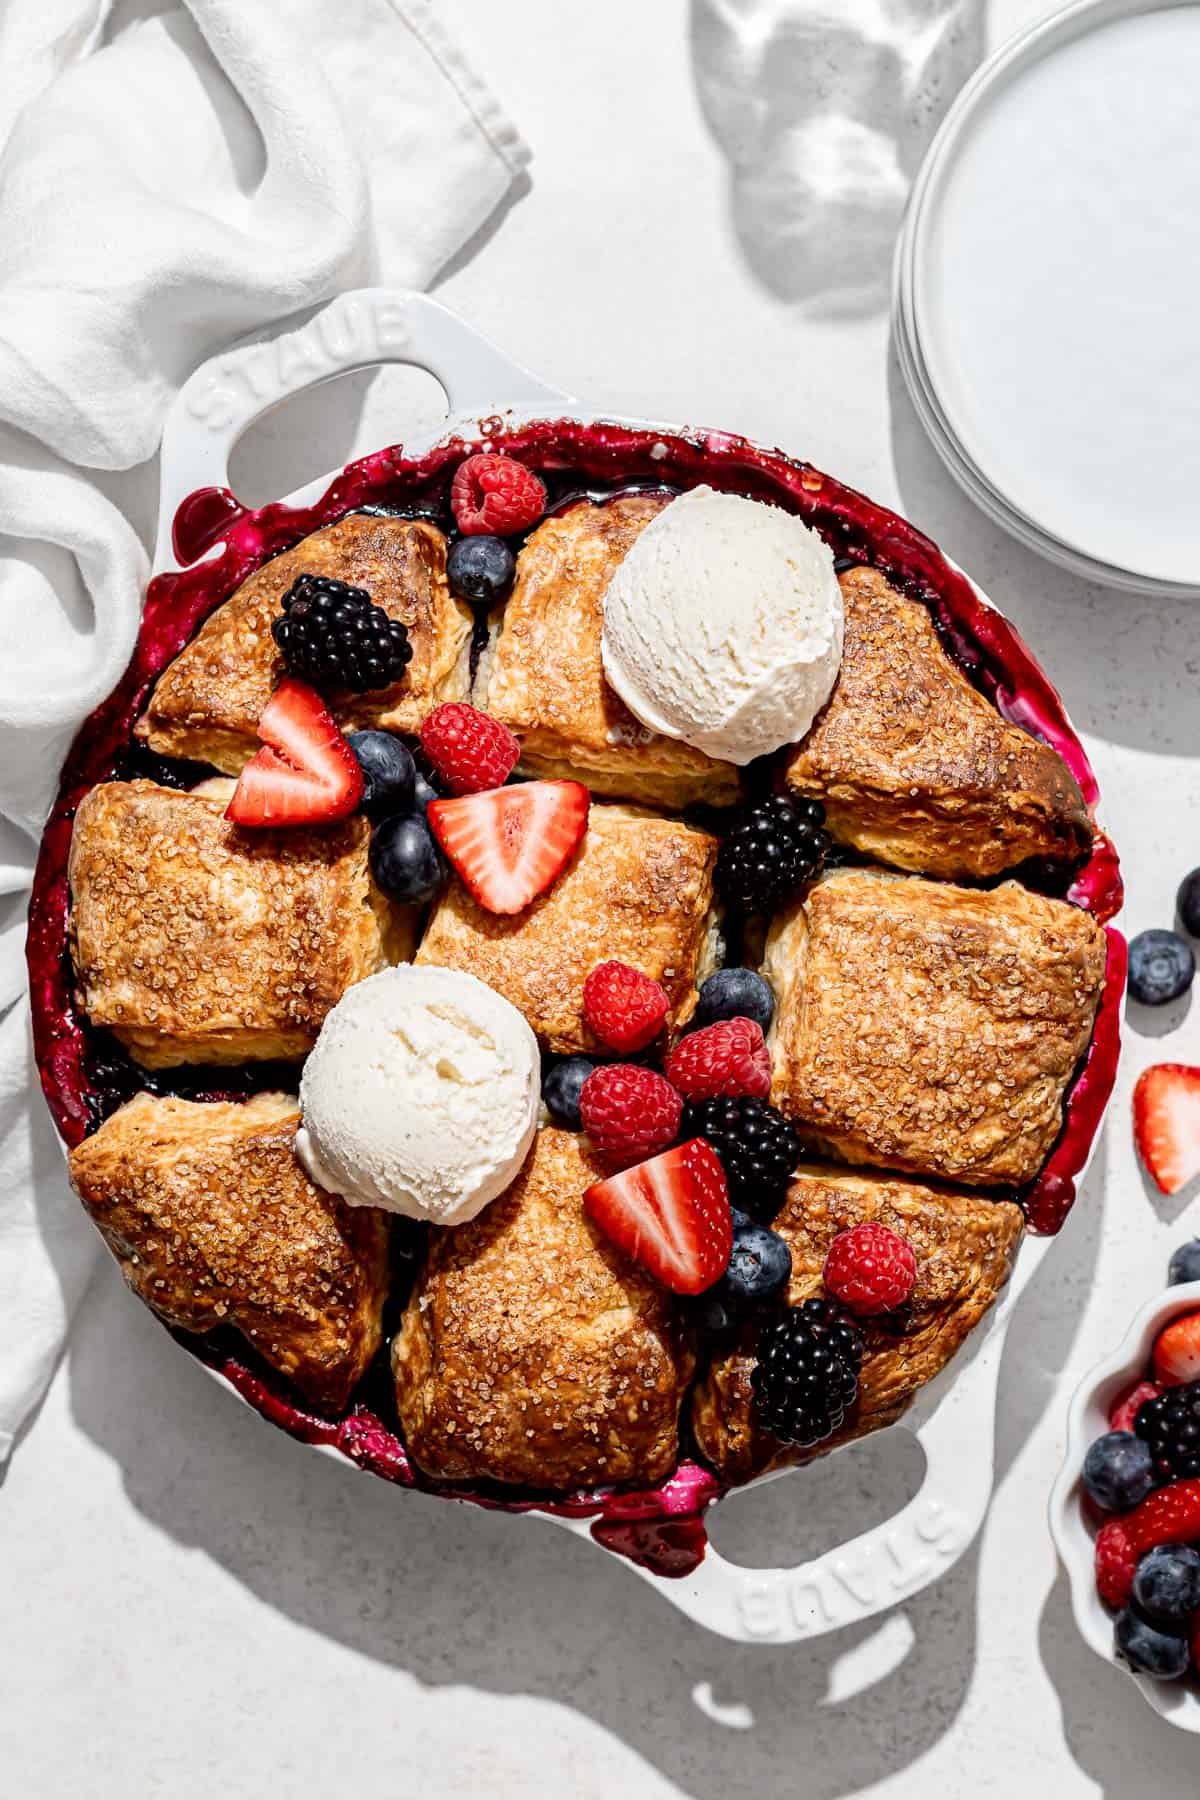 baked mixed berry cobbler with fresh fruit and ice cream on top.